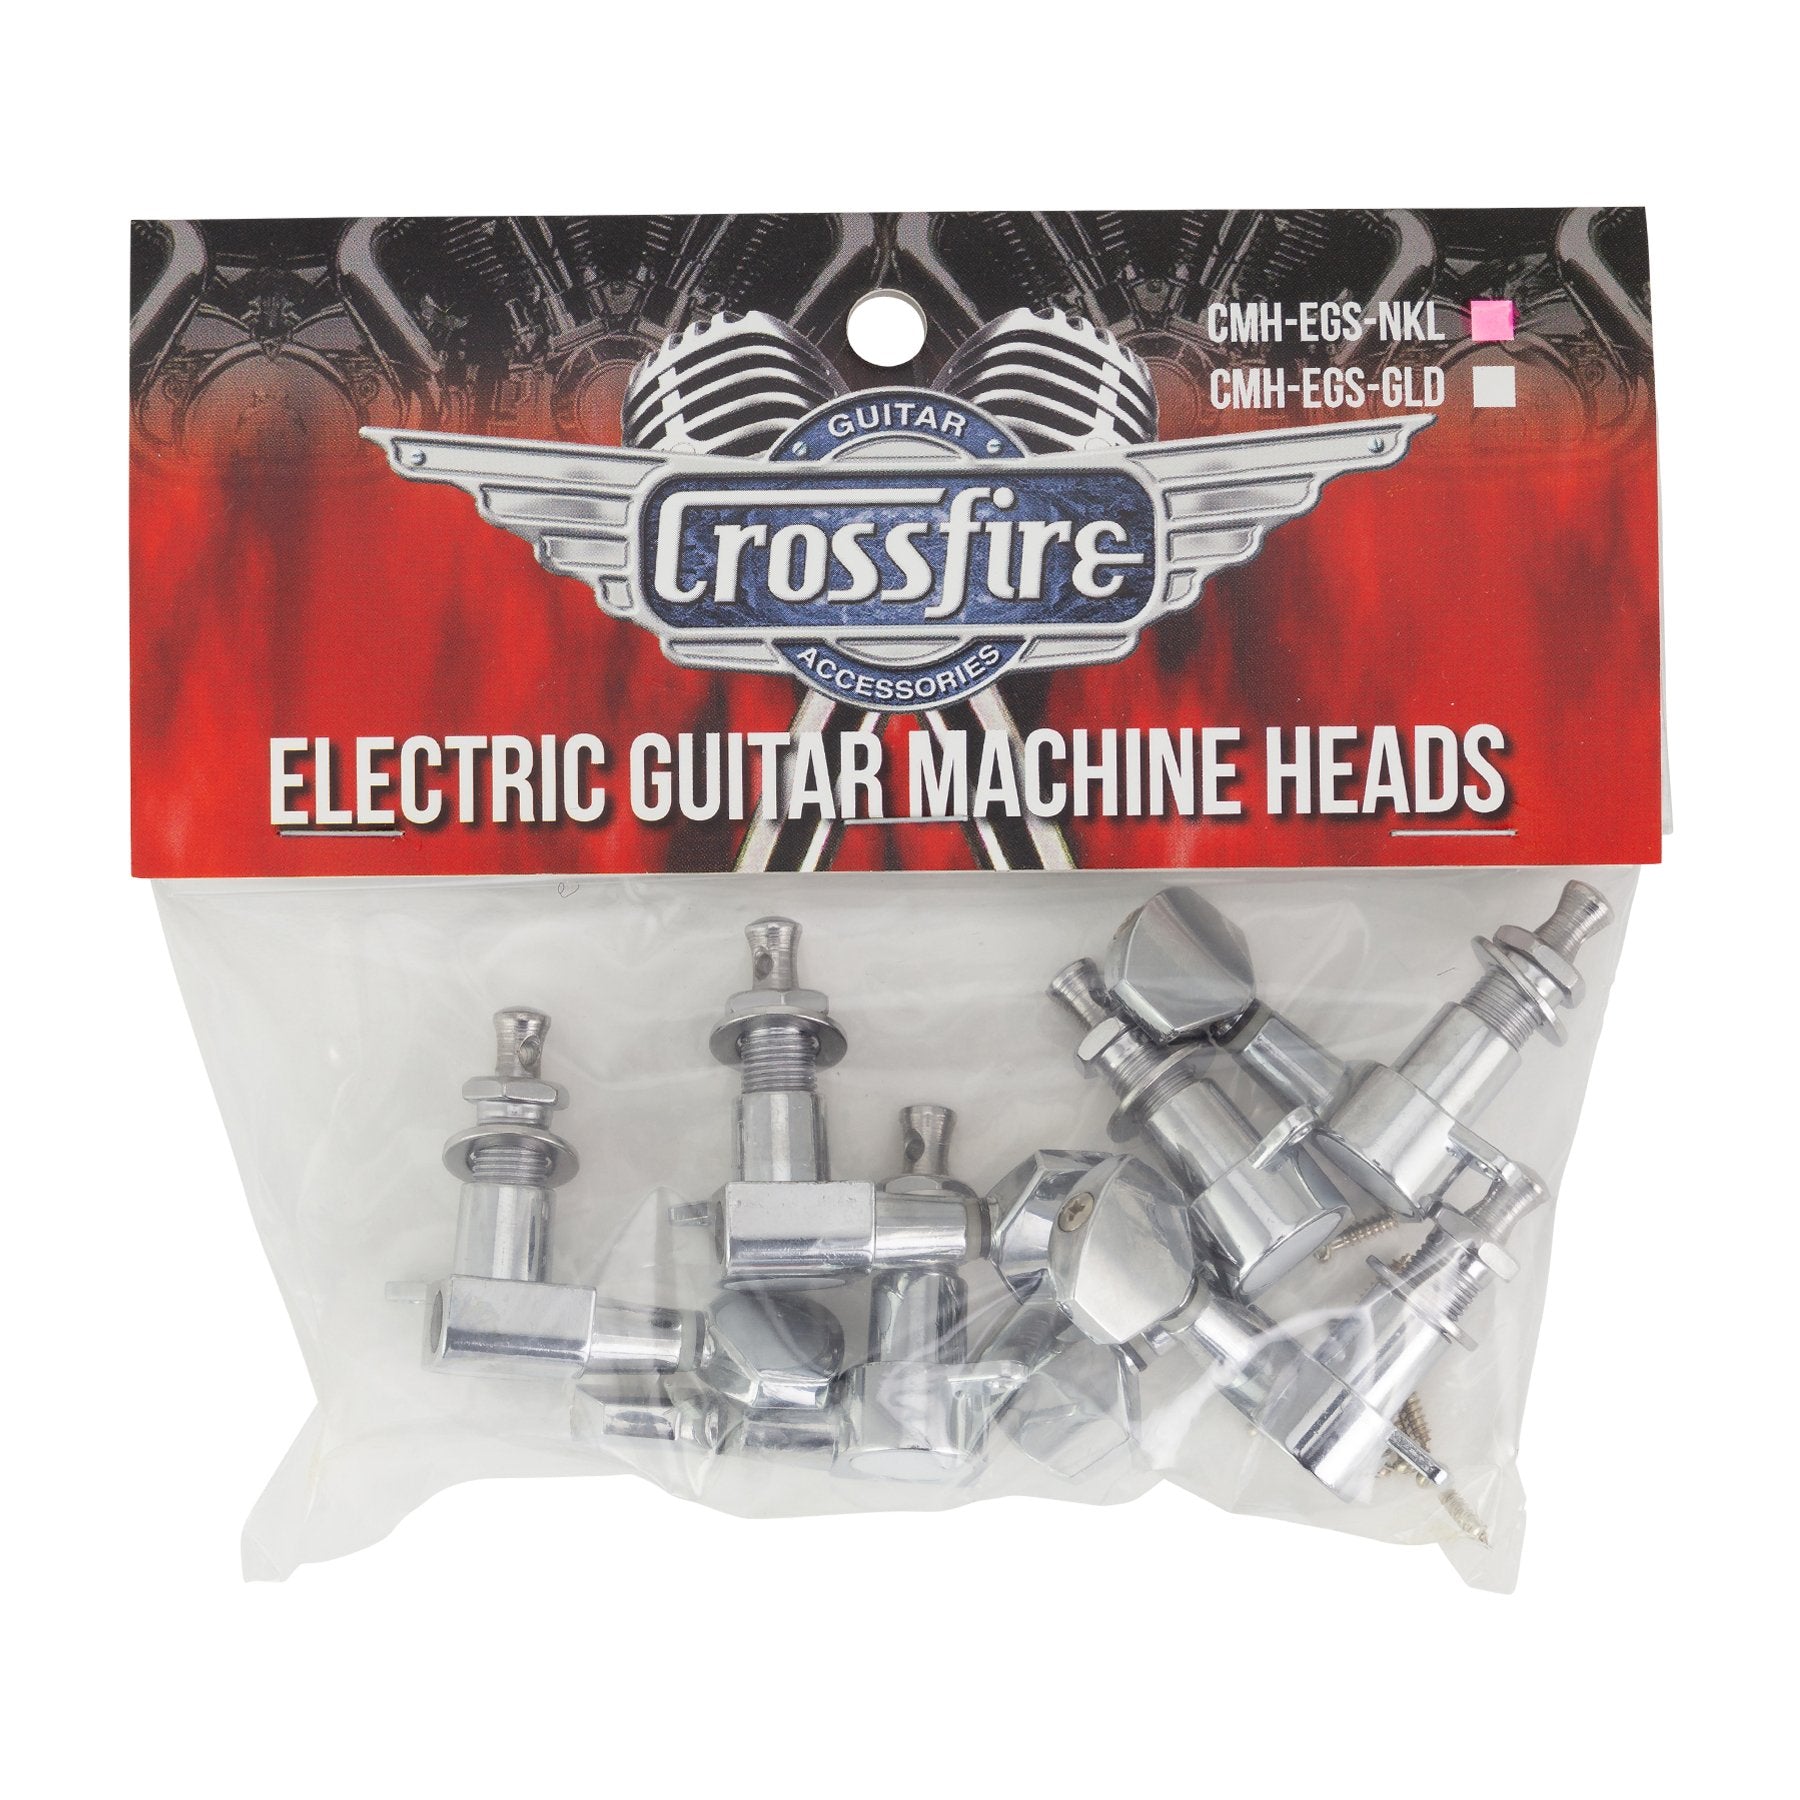 Crossfire Electric Guitar Machine Head Set (Nickel with Buttons)-CMH-EGS-NKL